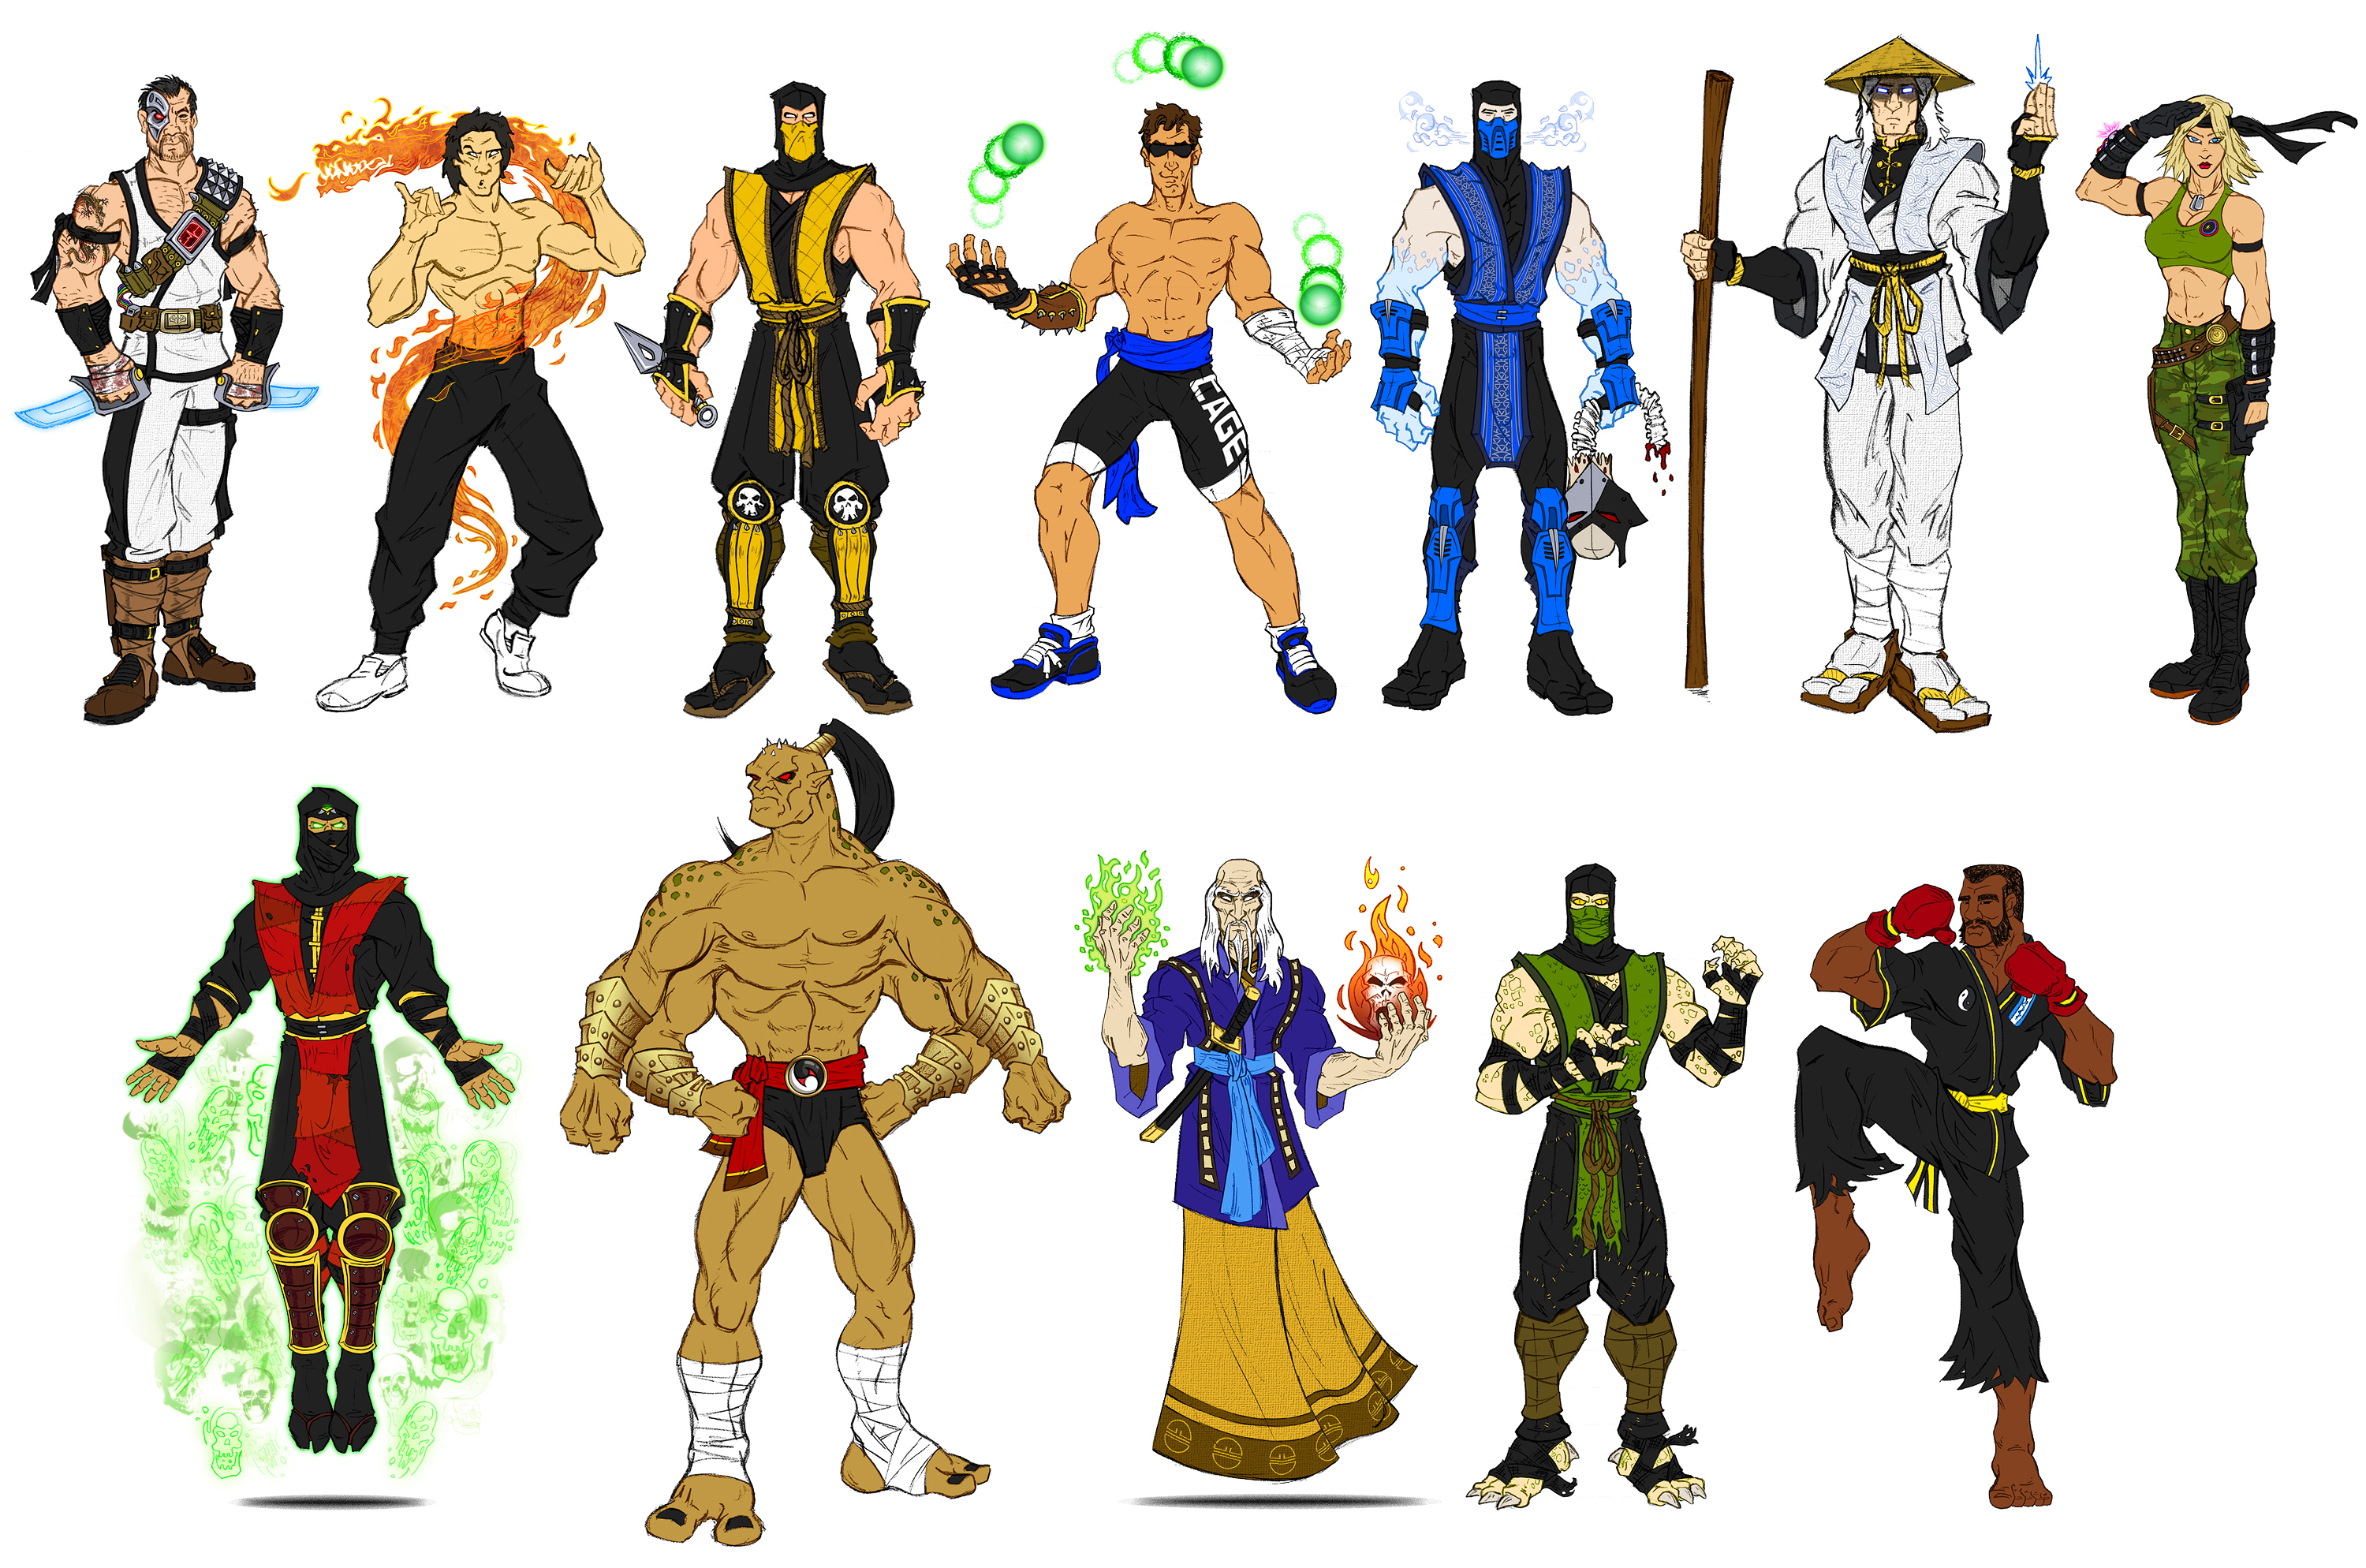 How The Mortal Kombat Movie Changed Kano's In-Game Character Design